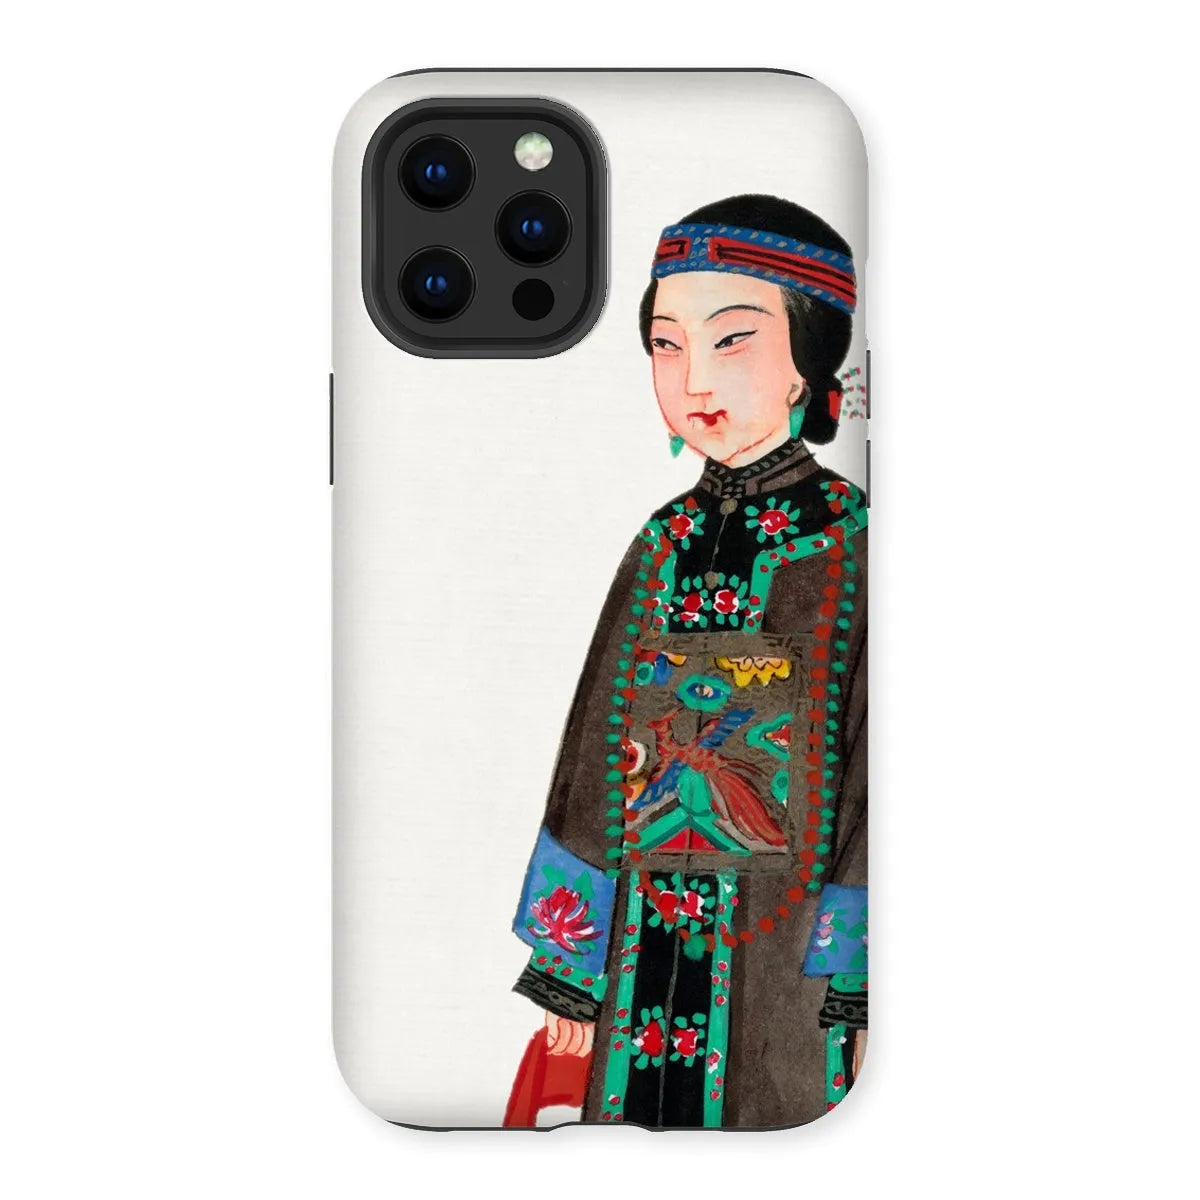 Noblewoman At Court - Chinese Aesthetic Art Phone Case - Iphone 12 Pro Max / Matte - Mobile Phone Cases - Aesthetic Art